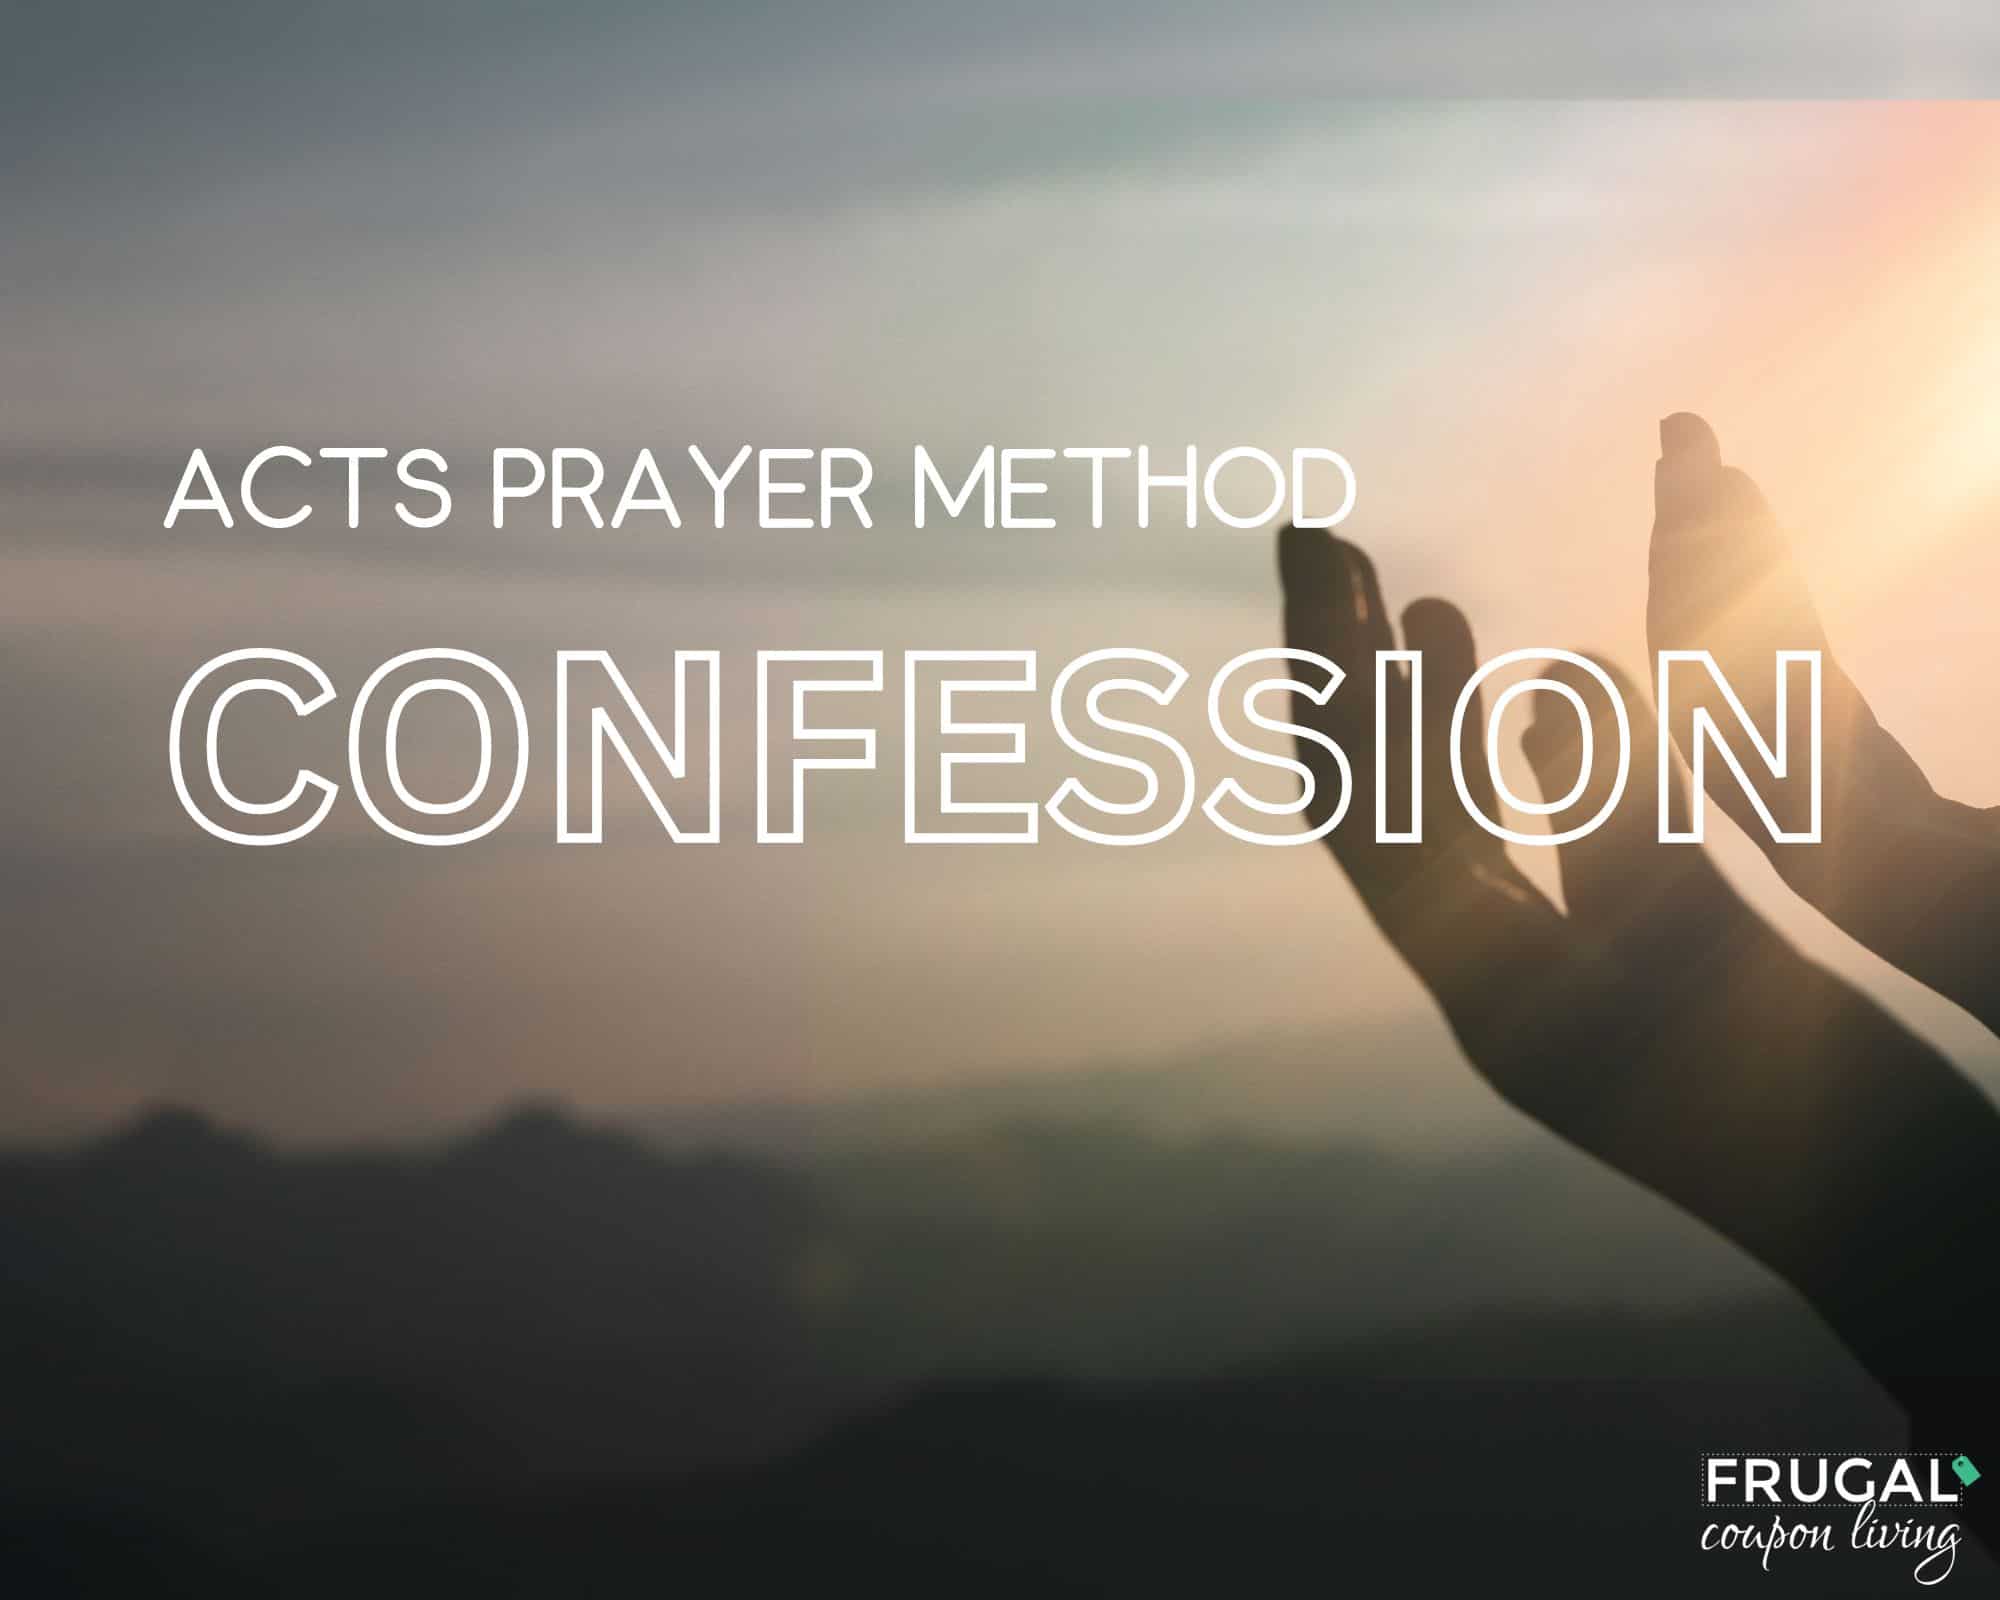 Confession Part of Acts Prayer